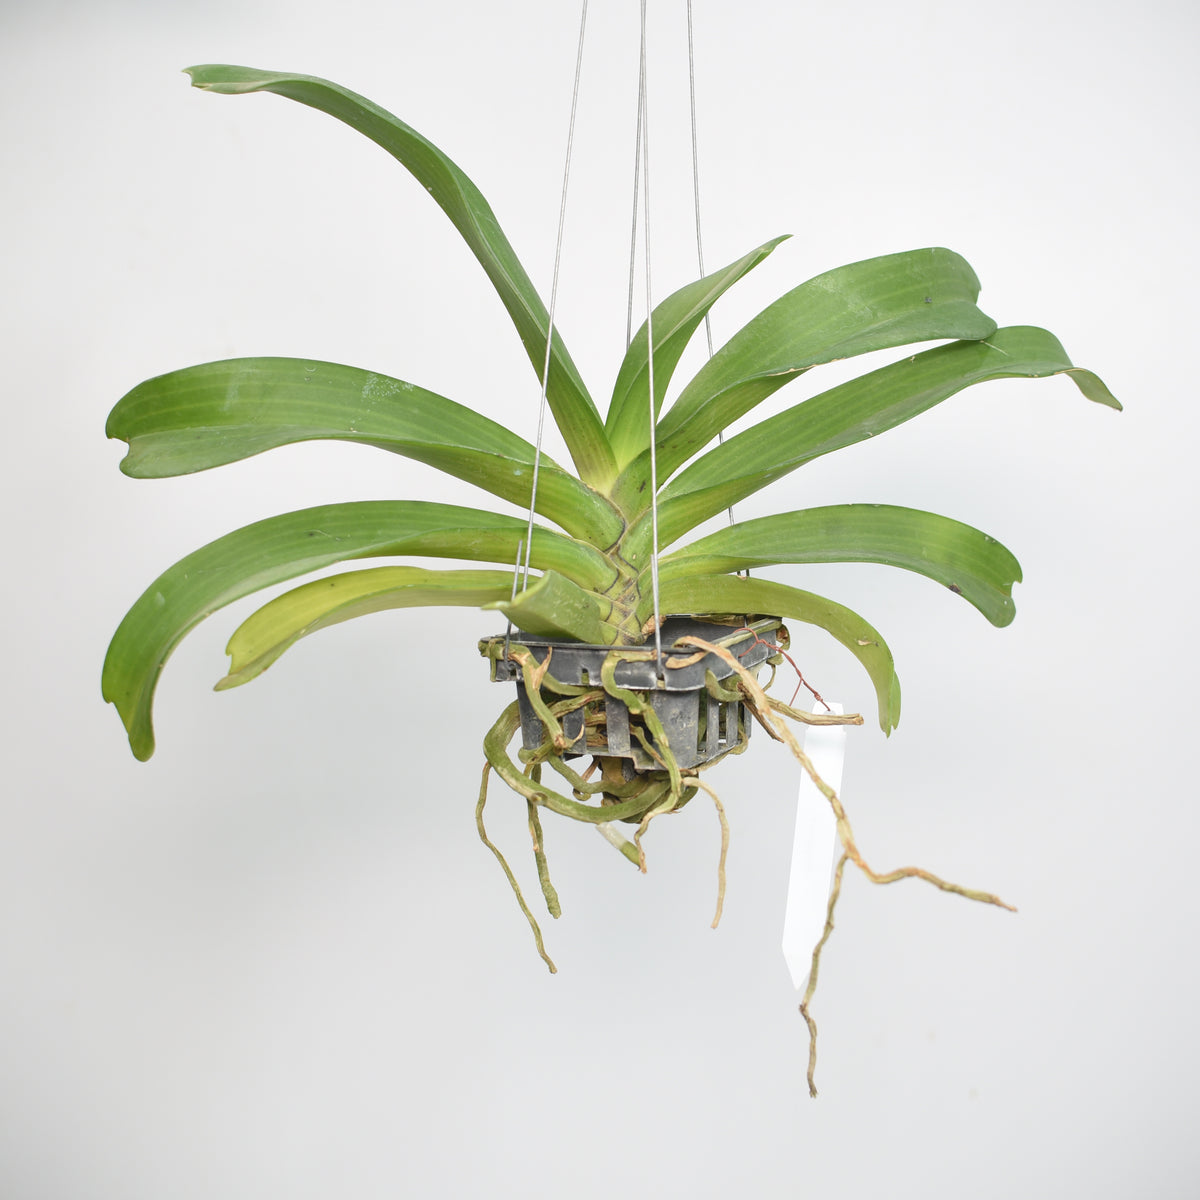 Unique 'Cartoon' orchid plant - Shop now for a captivating and artistic botanical delight